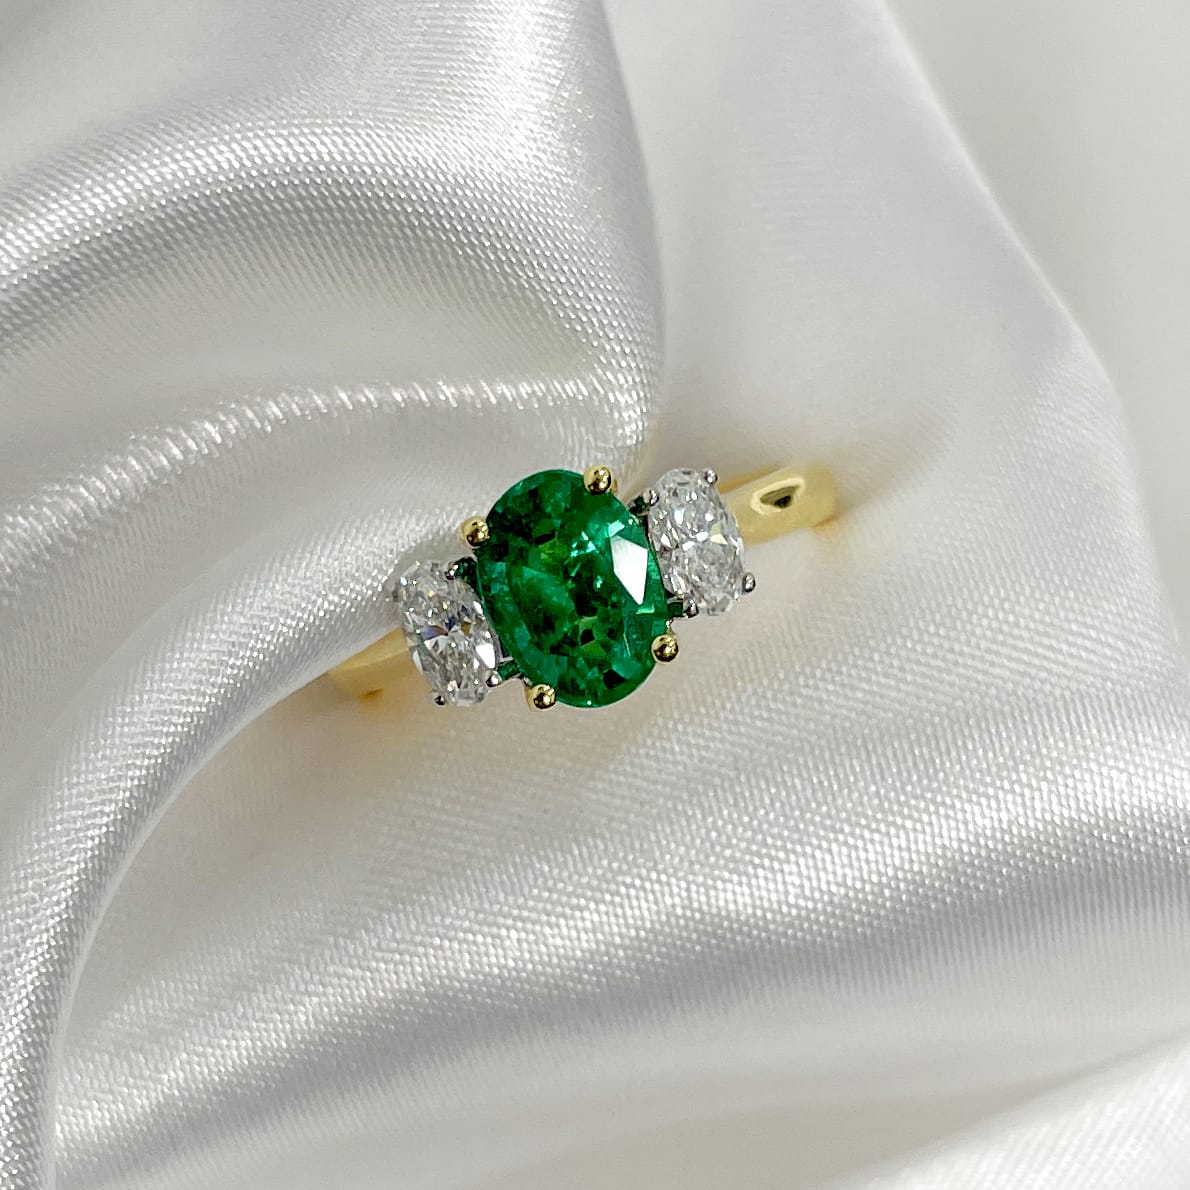 Emerald and diamond ring with yellow gold band available at LeGassick Diamonds and Jewellery Gold Coast, Australia.